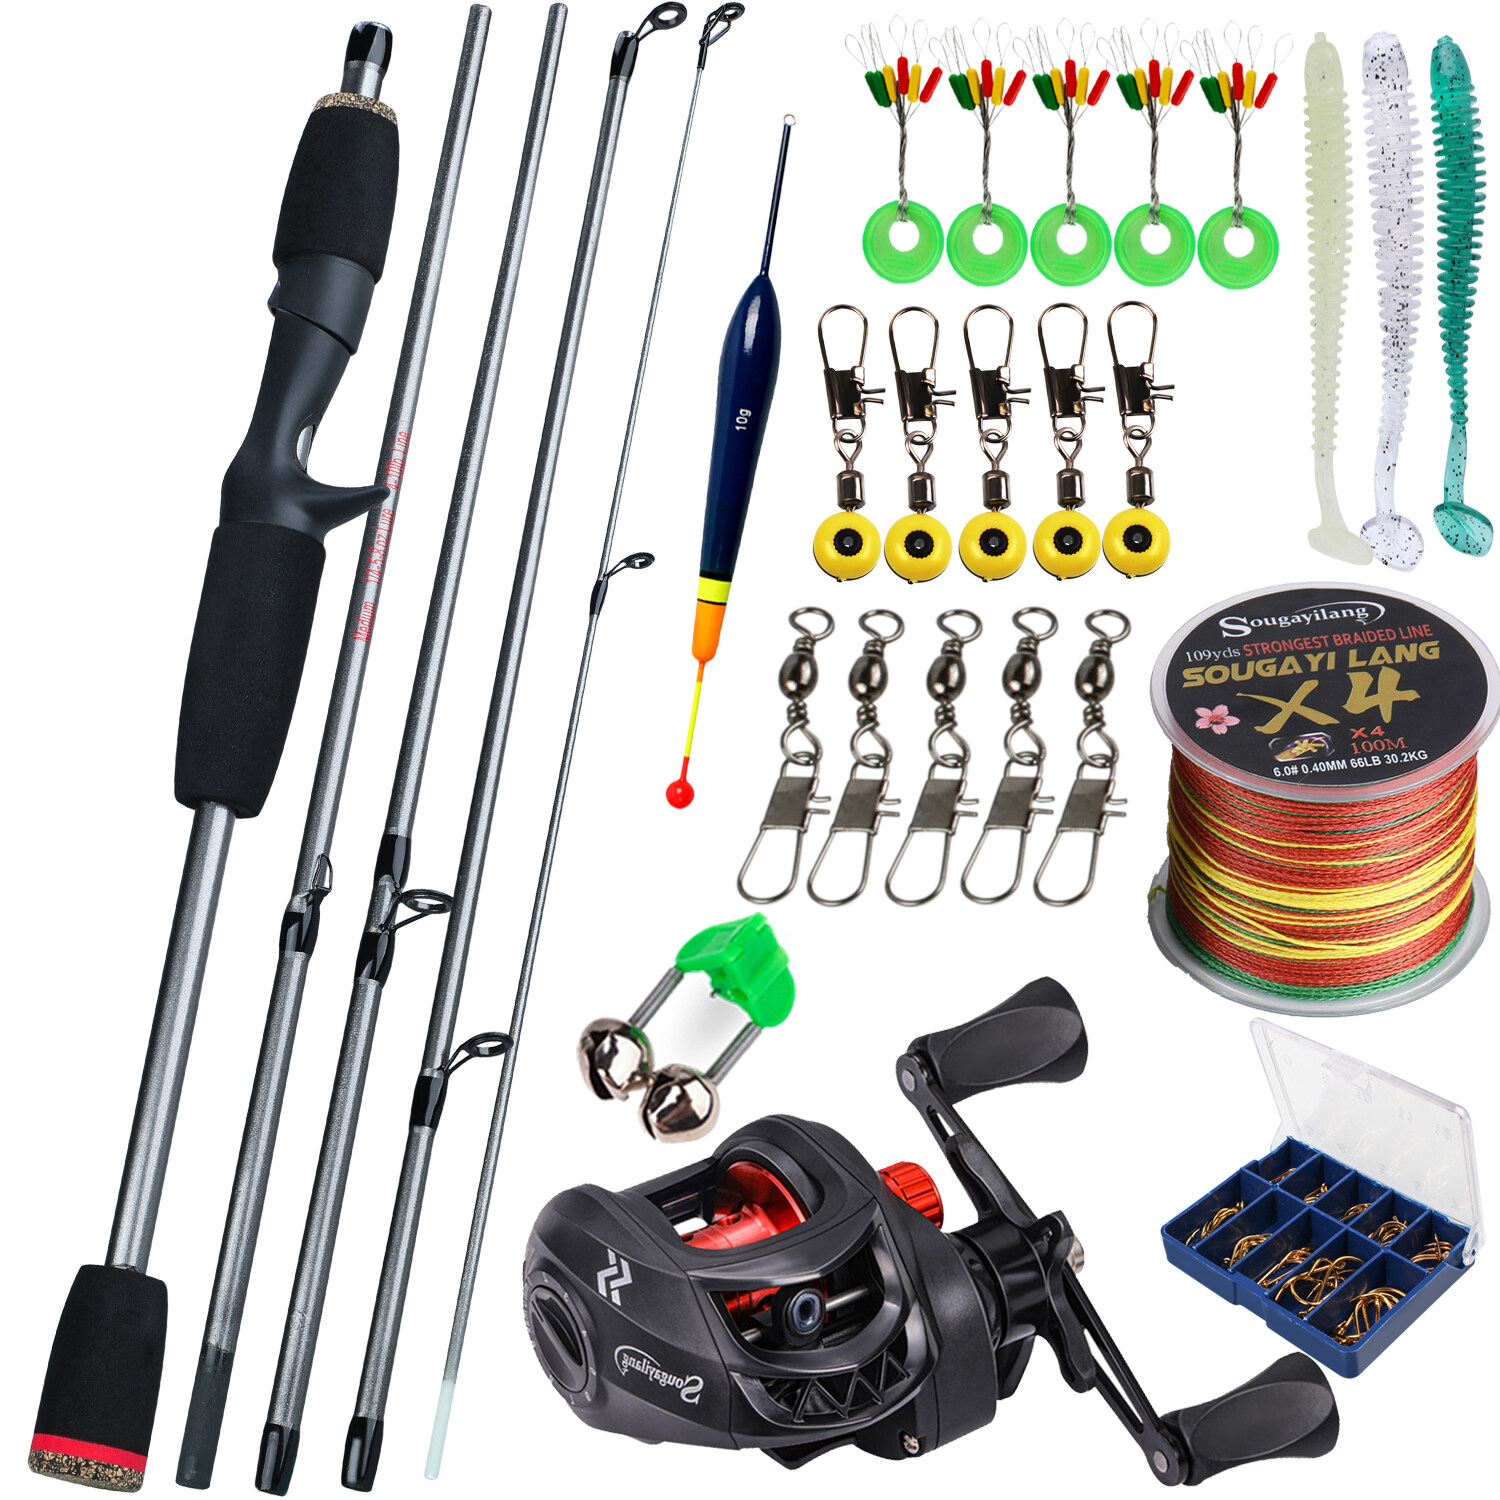 Fishing Rod And Fishing Reel Set, 5 Sections 66.93inch Fishing Rod,  Baitcasting Fishing Reel, With Fishing Line, Fishing Accessories For  Beginners